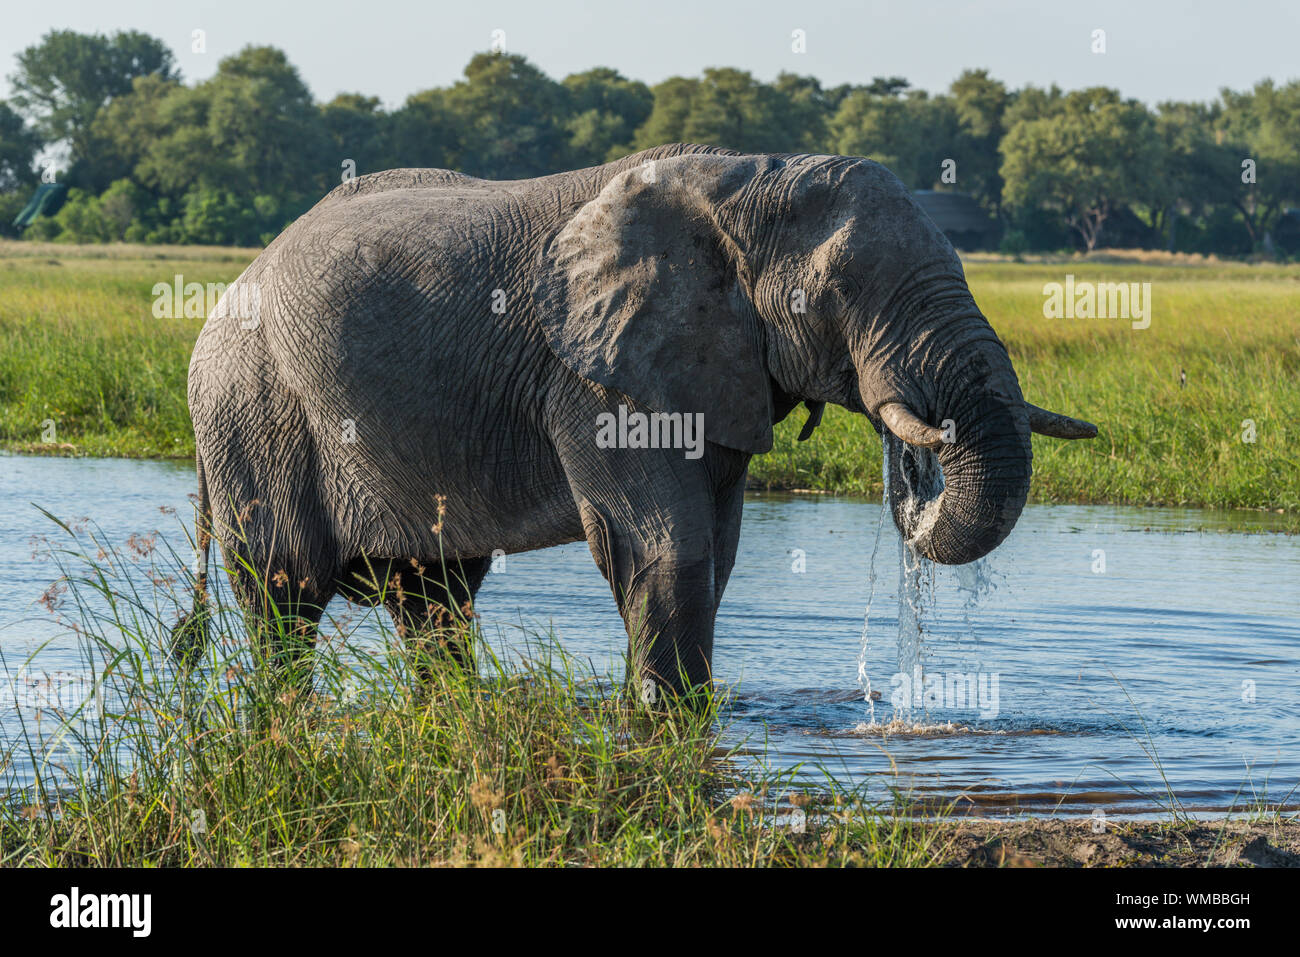 African Elephant Drinking Water At Waterhole Stock Photo